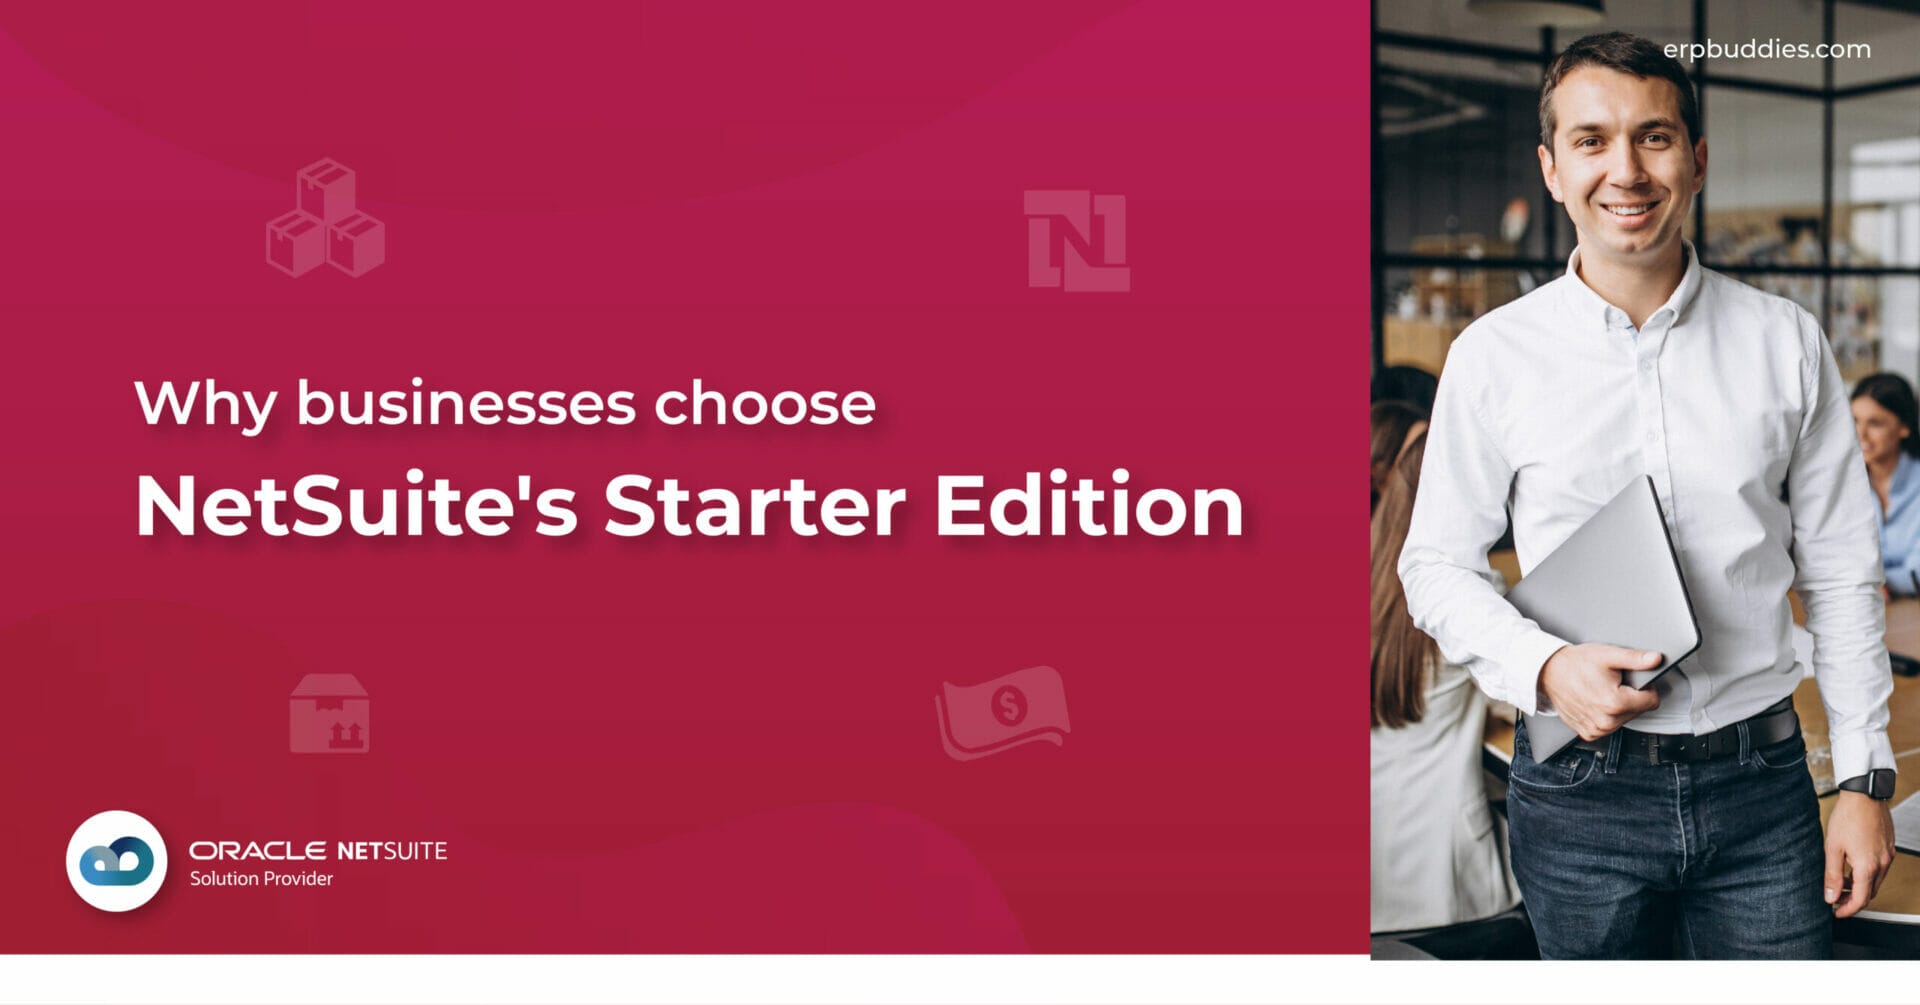 Why businesses choose NetSuite’s Starter Edition